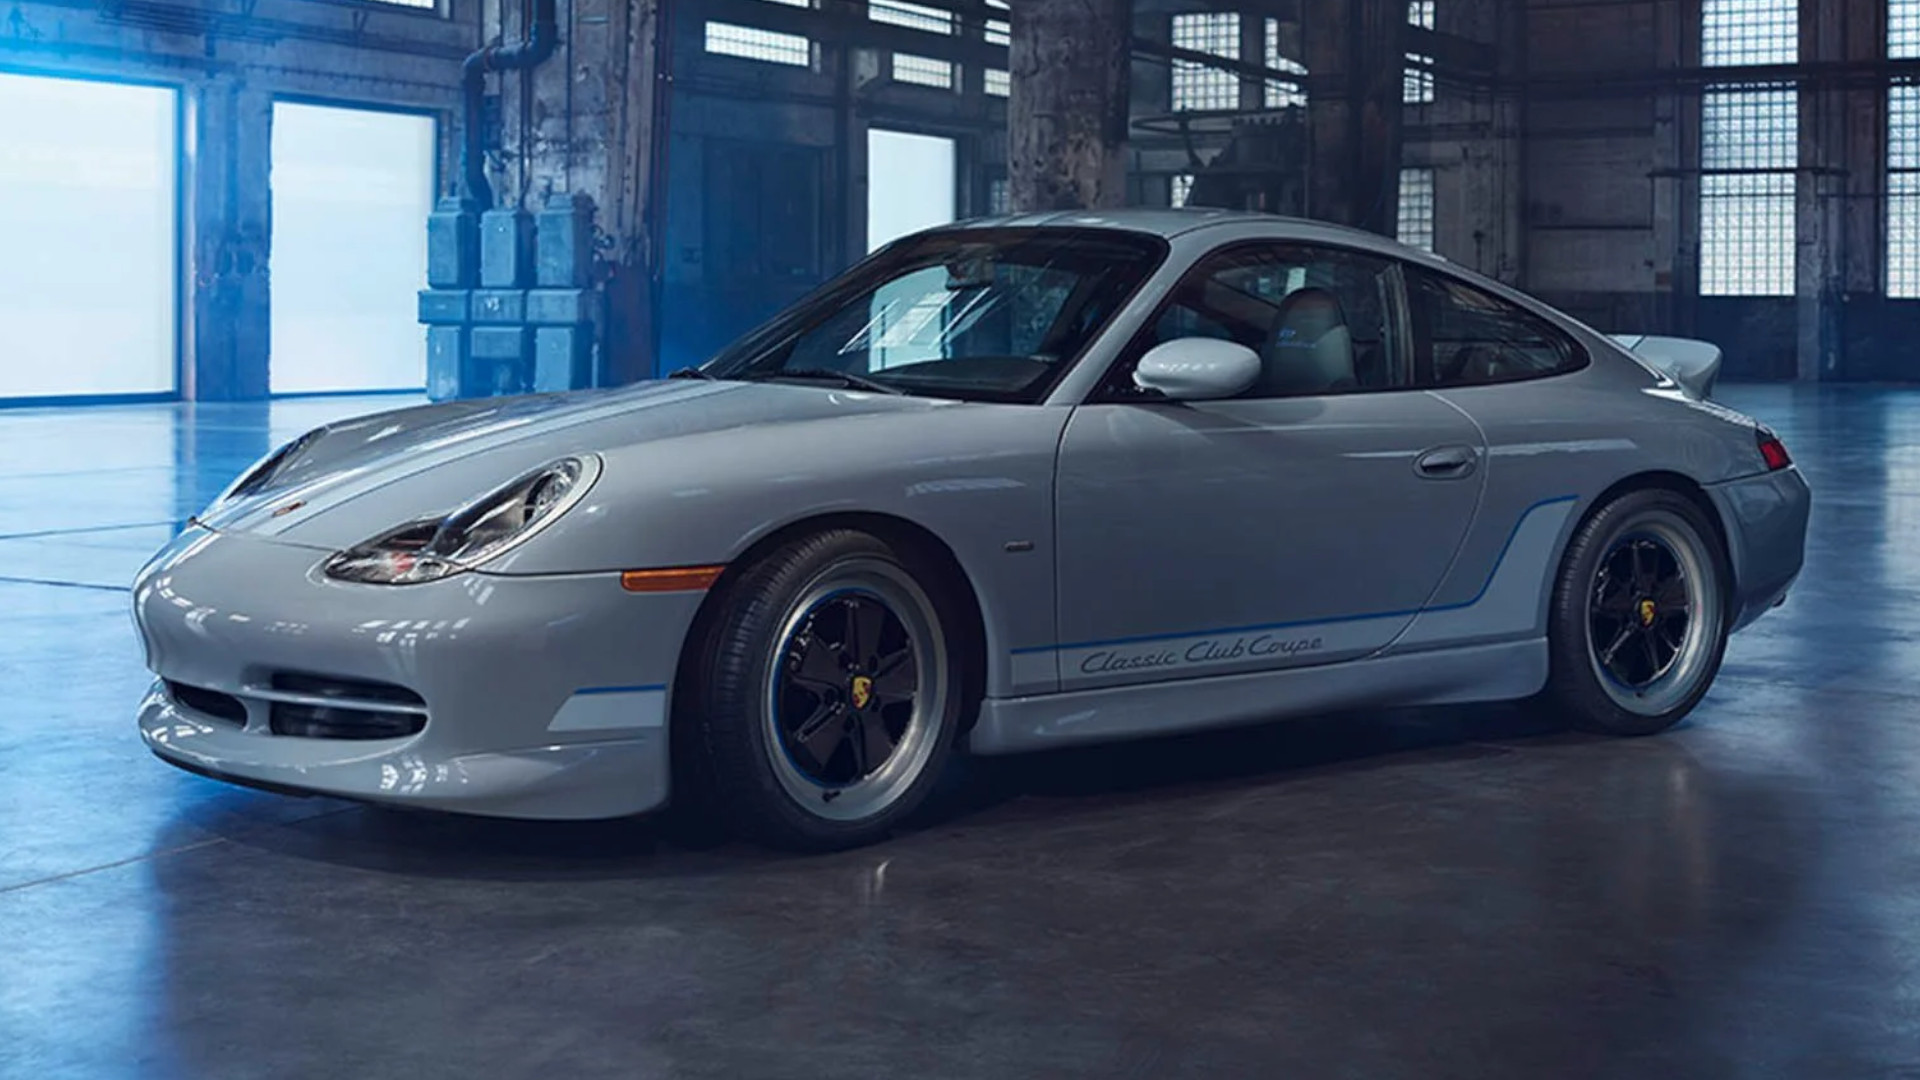 Factory One-Off Porsche 911 Sells for $1.3 Million. Long Live the 996